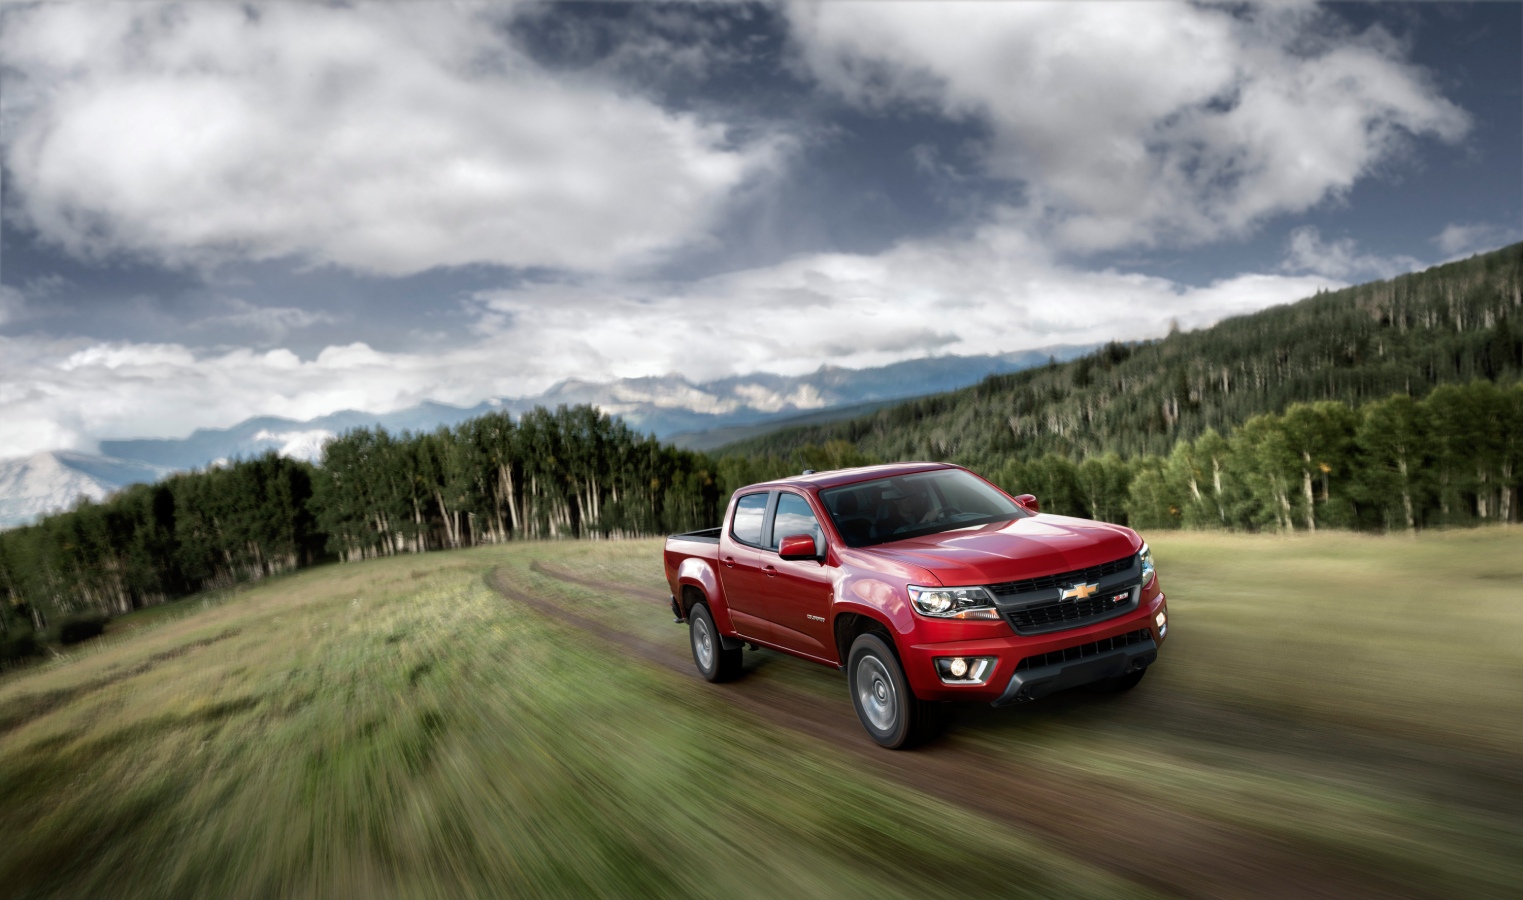 Reliable used pickup trucks under $25,000 like the Chevrolet Colorado